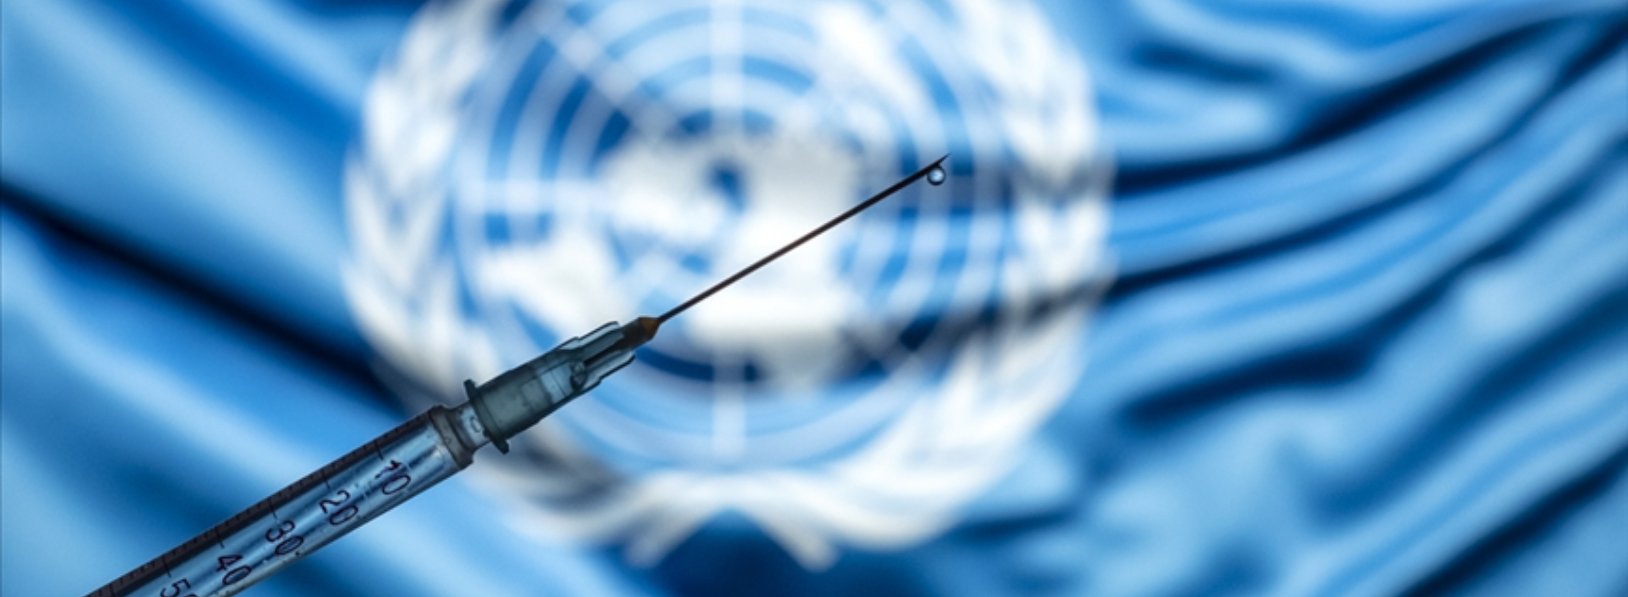 UNICEF has contracted AstraZeneca to supply the Covid-19 vaccine for 85 countries.